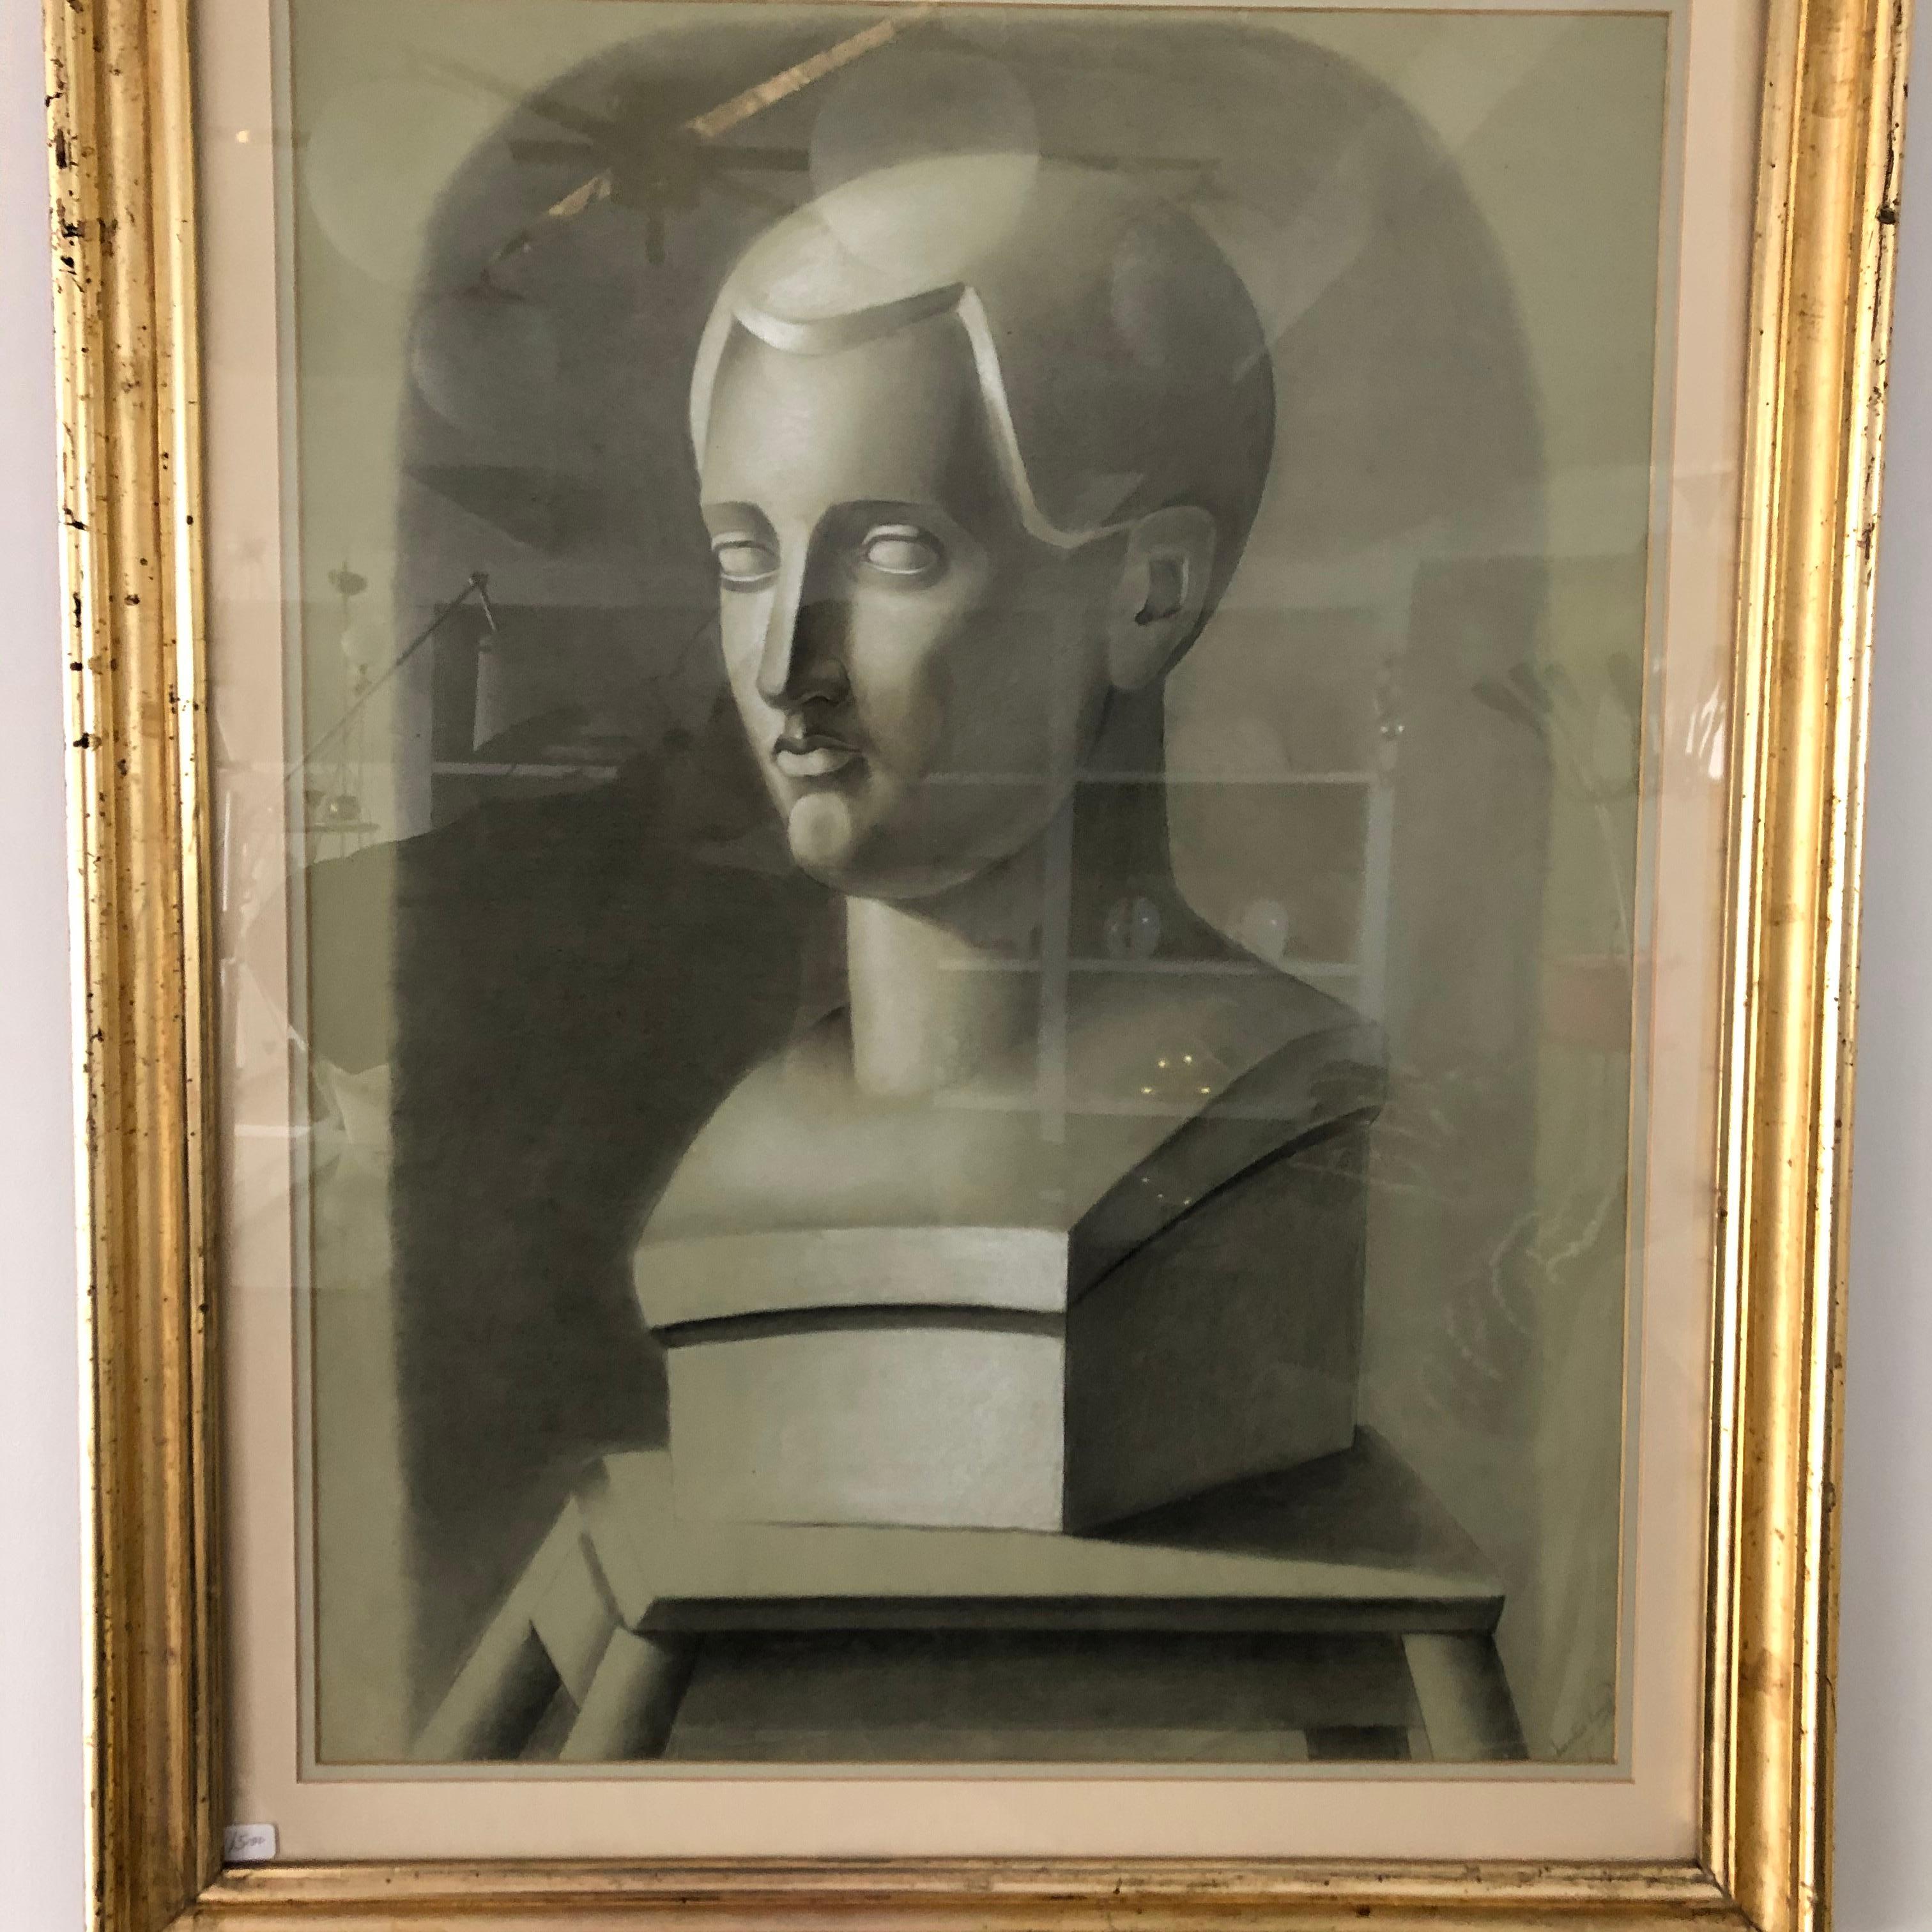 This early 20th century portrait depicts the bust of a man on pedestal, drawn from a sculptural piece in charcoal. These were popular 19th century renditions usually done in a neoclassic style but with modern influences. Matted and framed in lemon